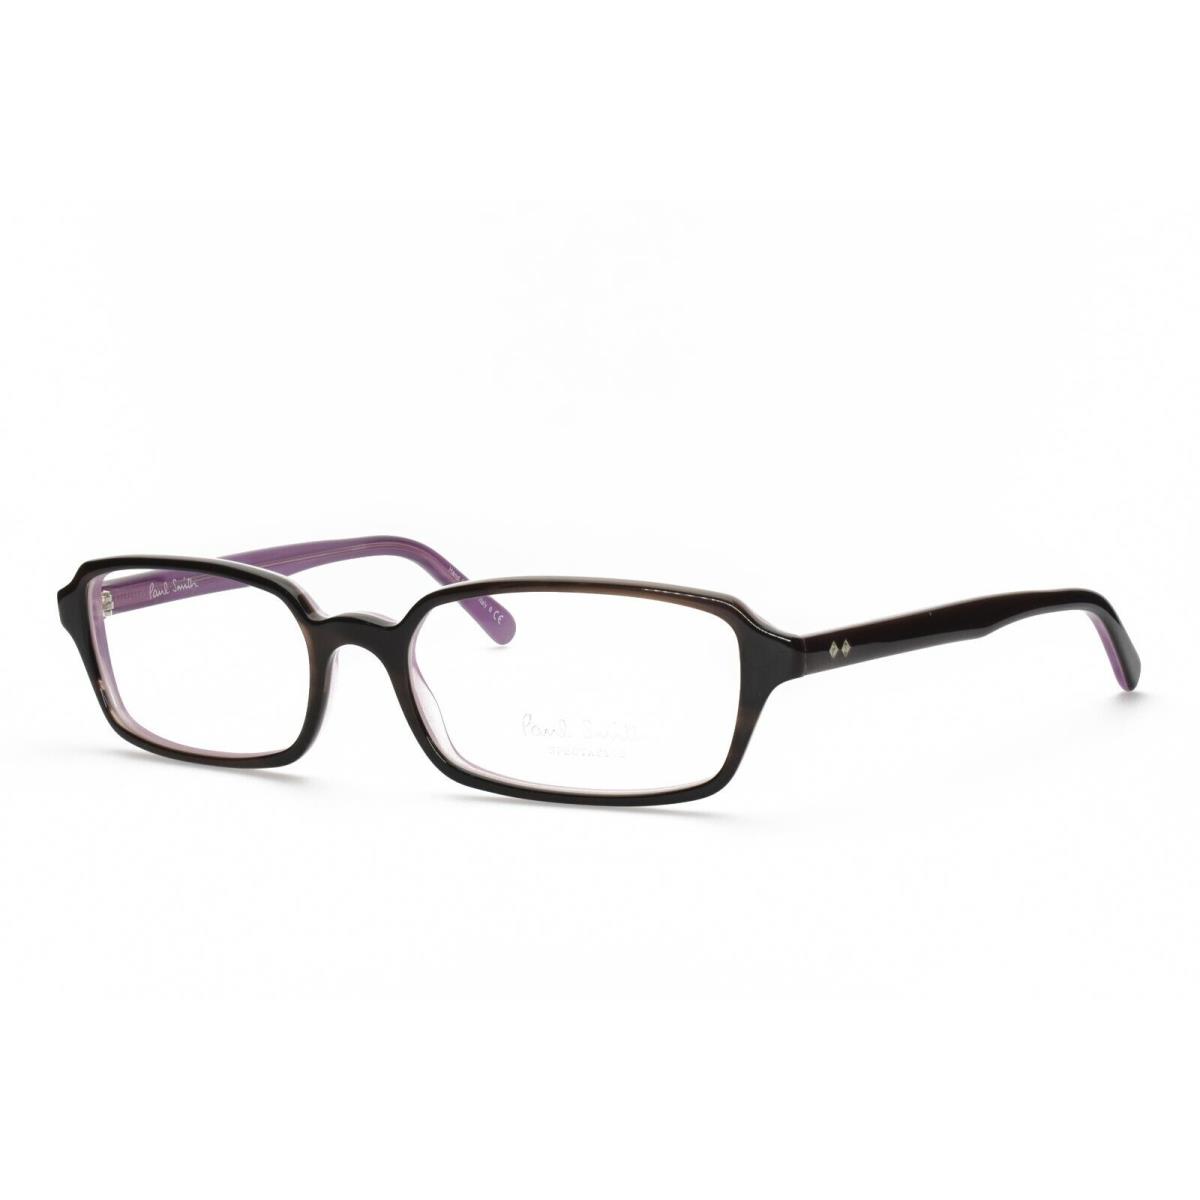 Paul Smith PS Wollaton 8078 1089 Eyeglasses Frames Only 52-17-140